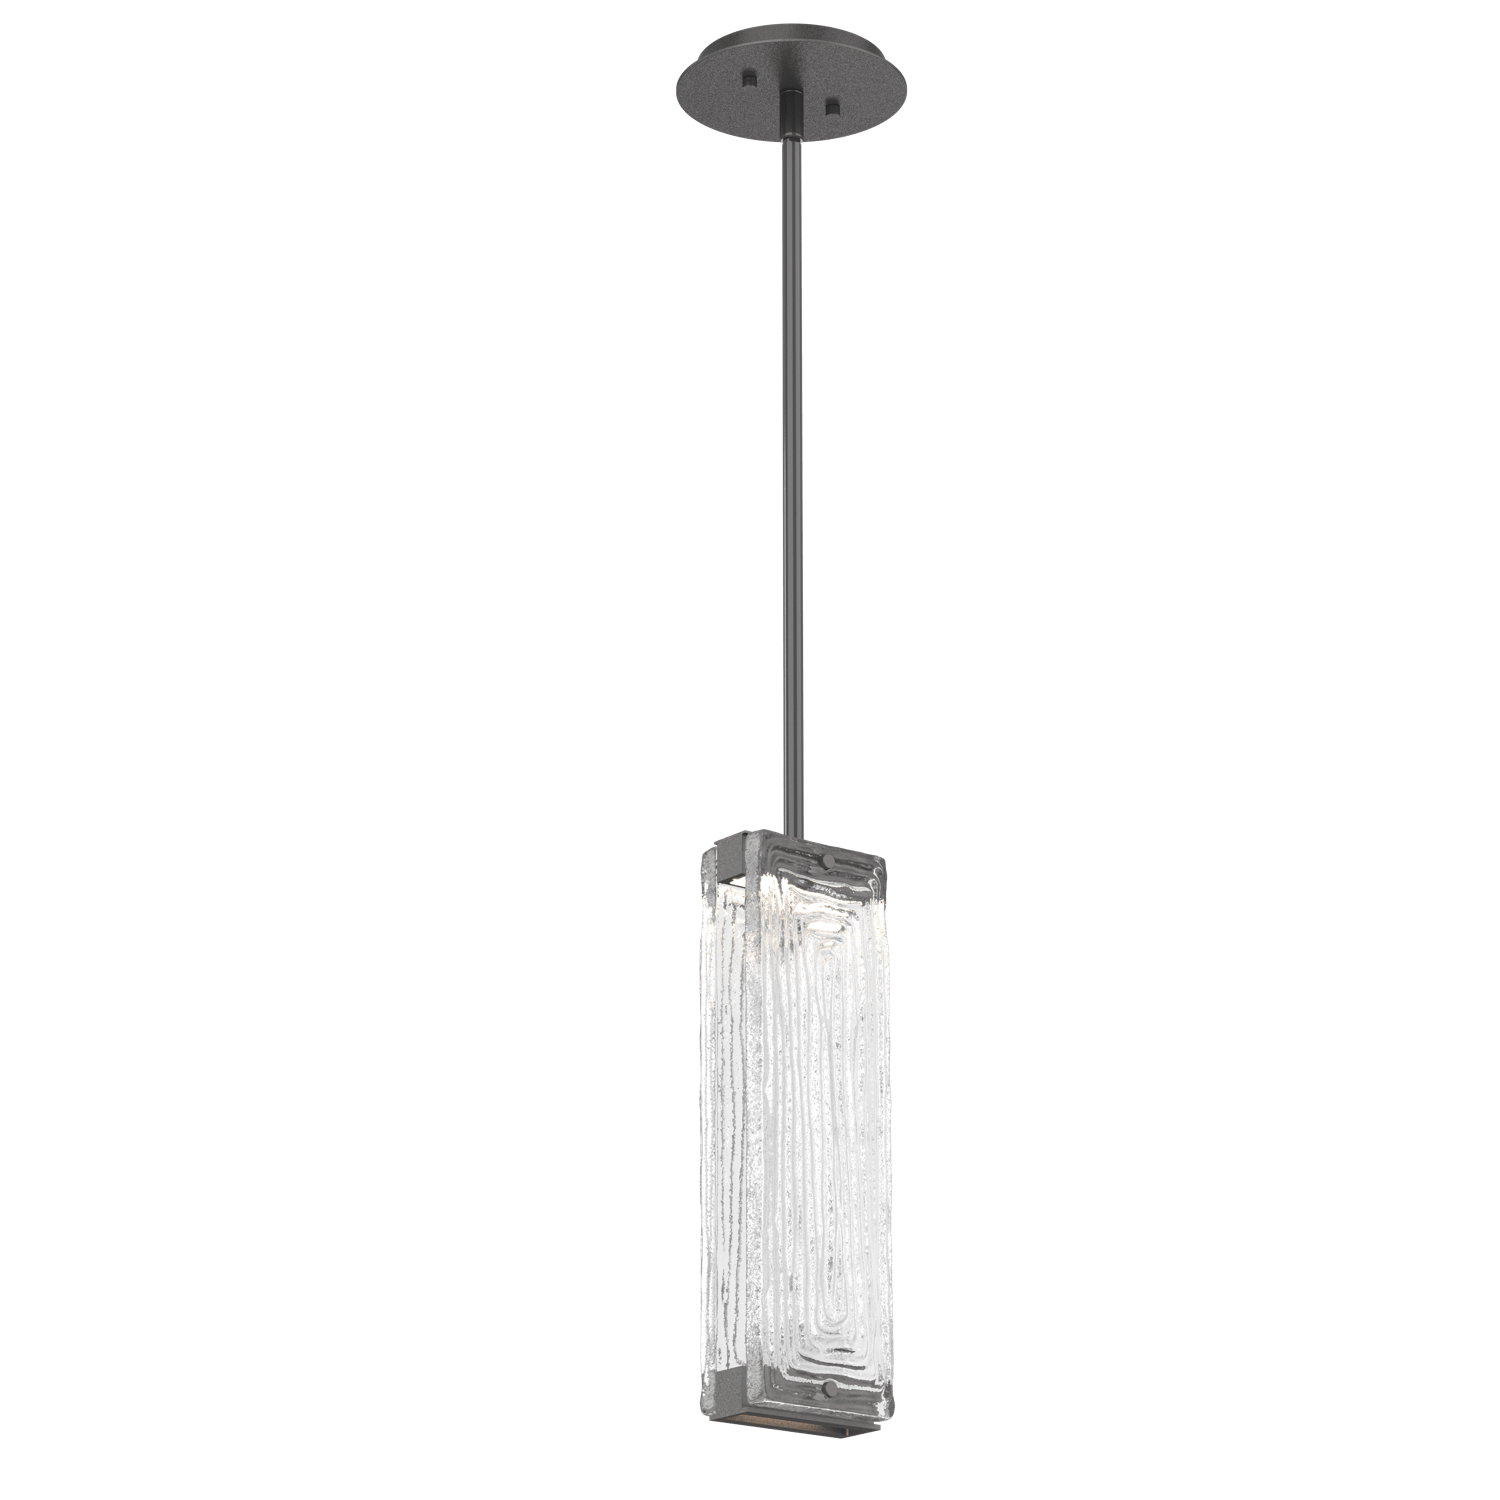 LAB0090-01-GP-TL-Hammerton-Studio-Tabulo-pendant-light-with-graphite-finish-and-clear-linea-cast-glass-shade-and-LED-lamping